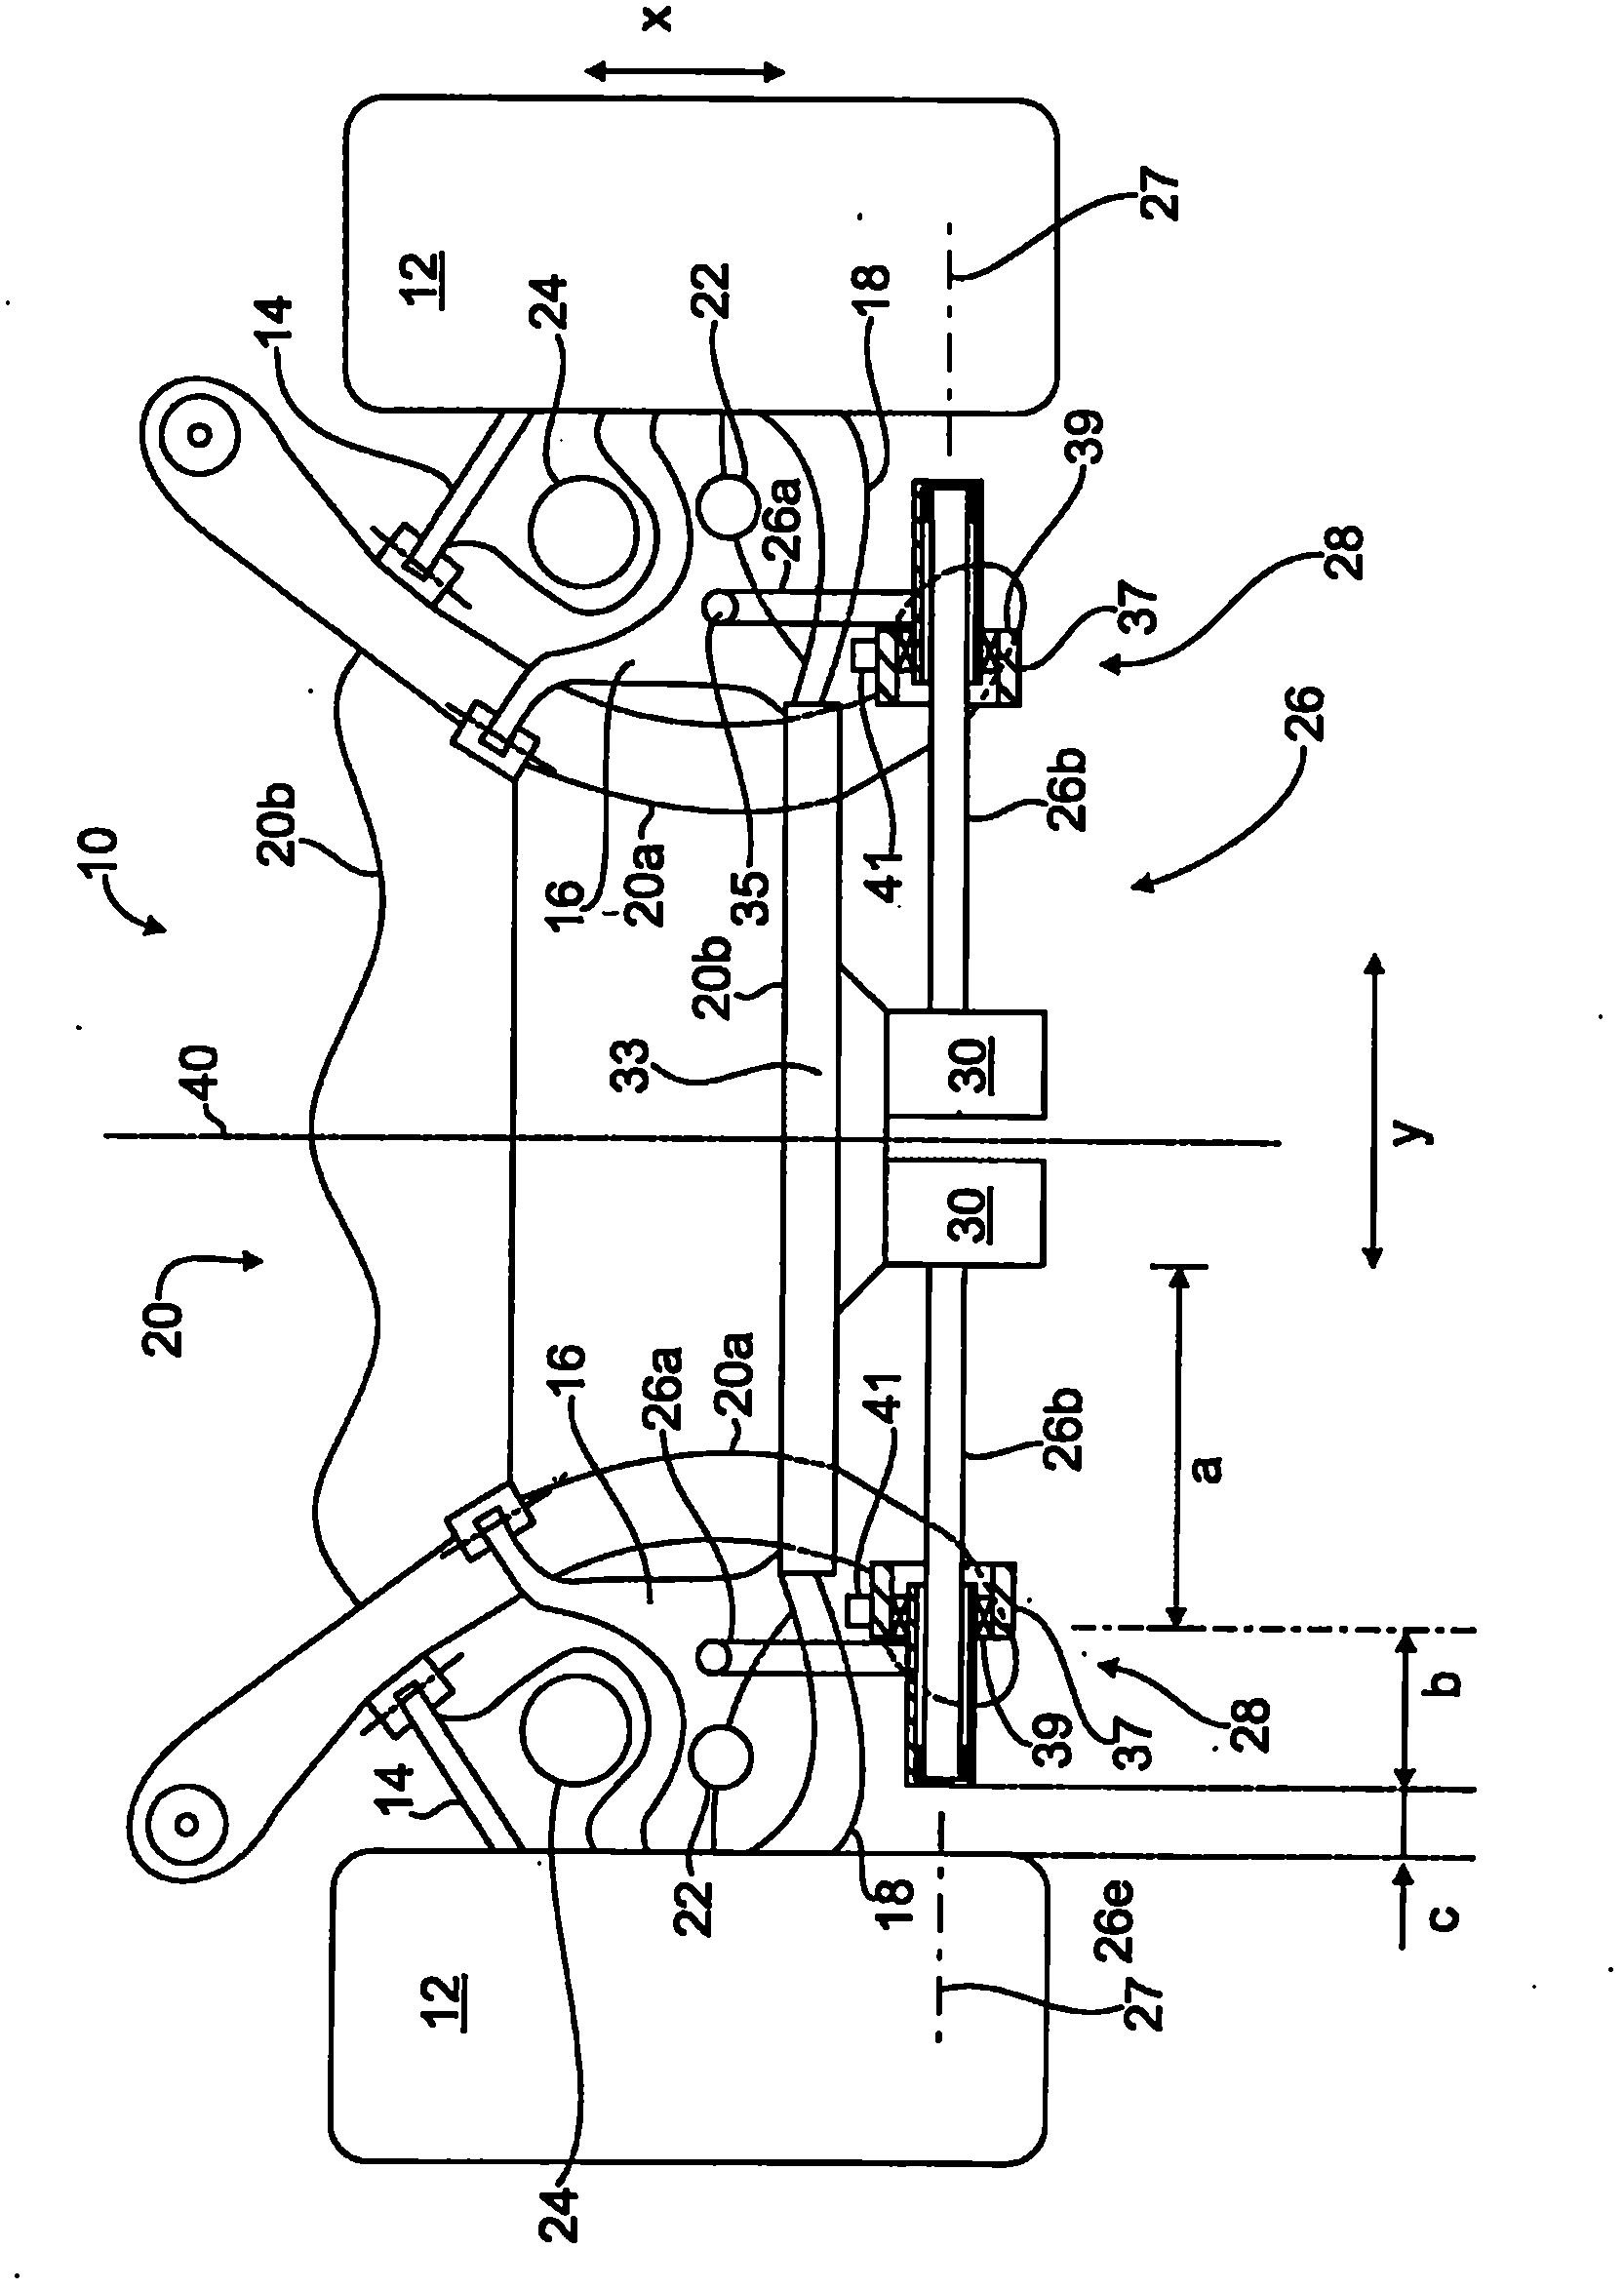 The Arrangement Structure of the Stabilizer on the Motor Wheel Suspension Structure